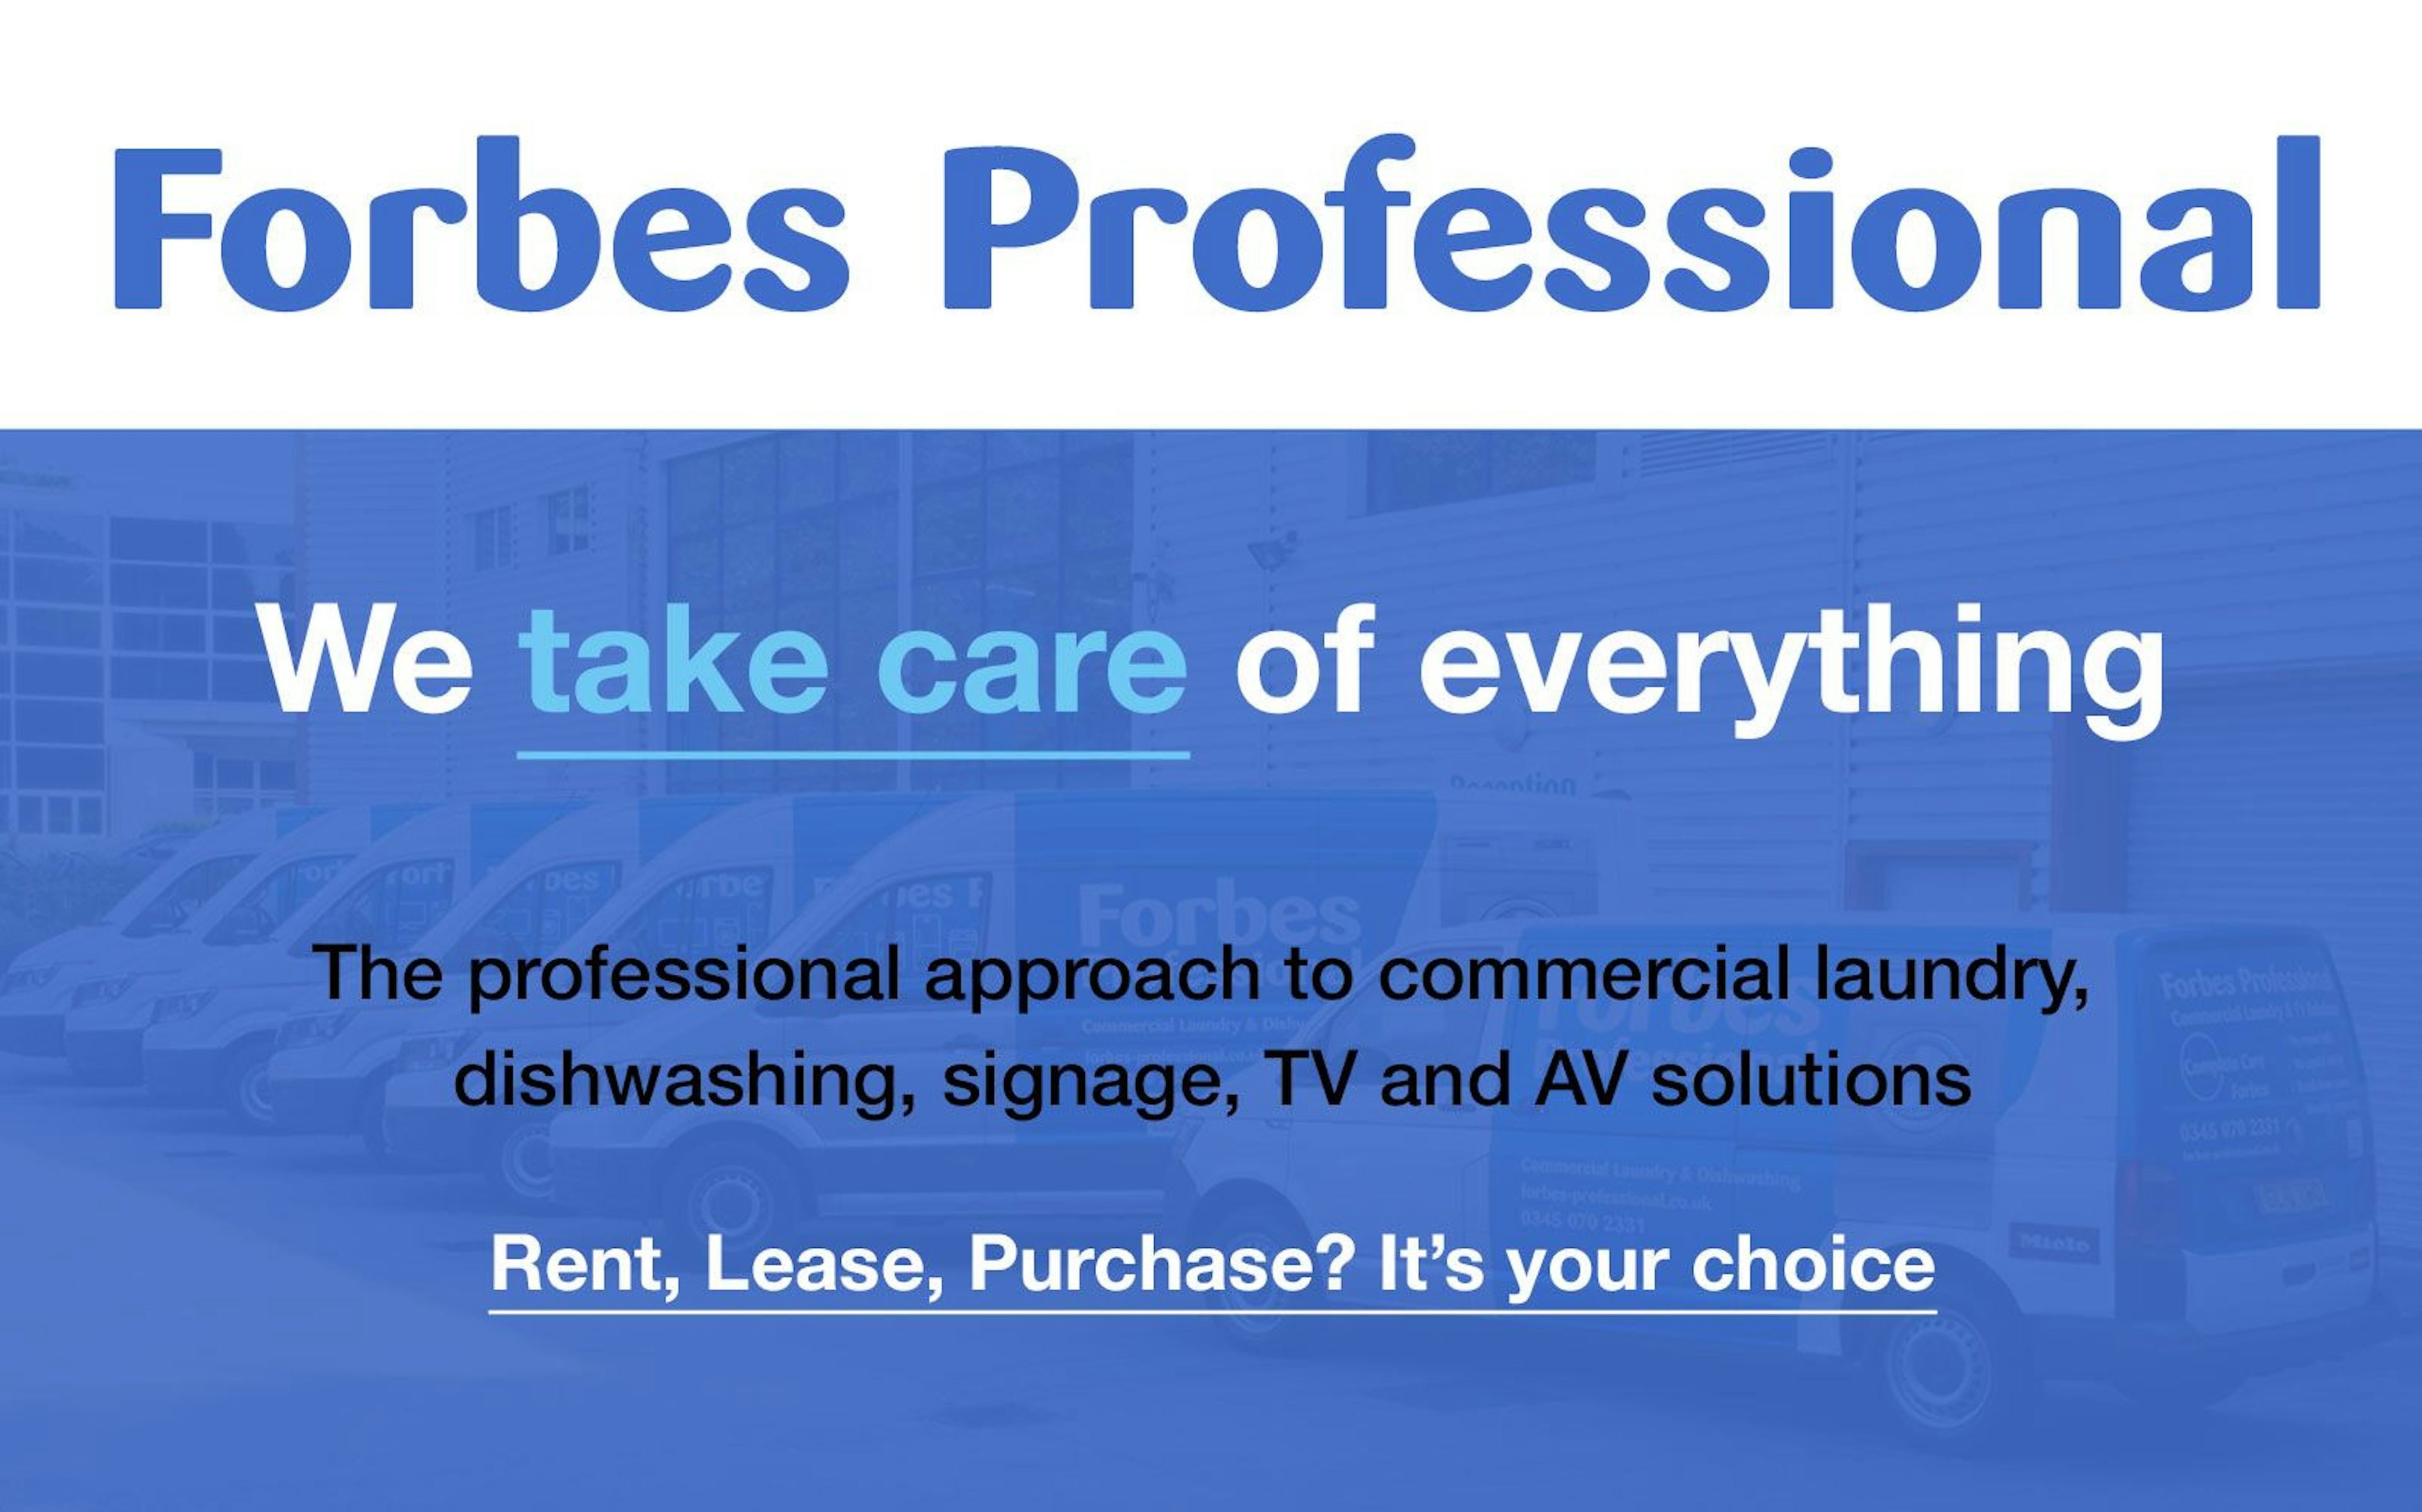 Forbes Professional announces further expansion within the commercial laundry sector.